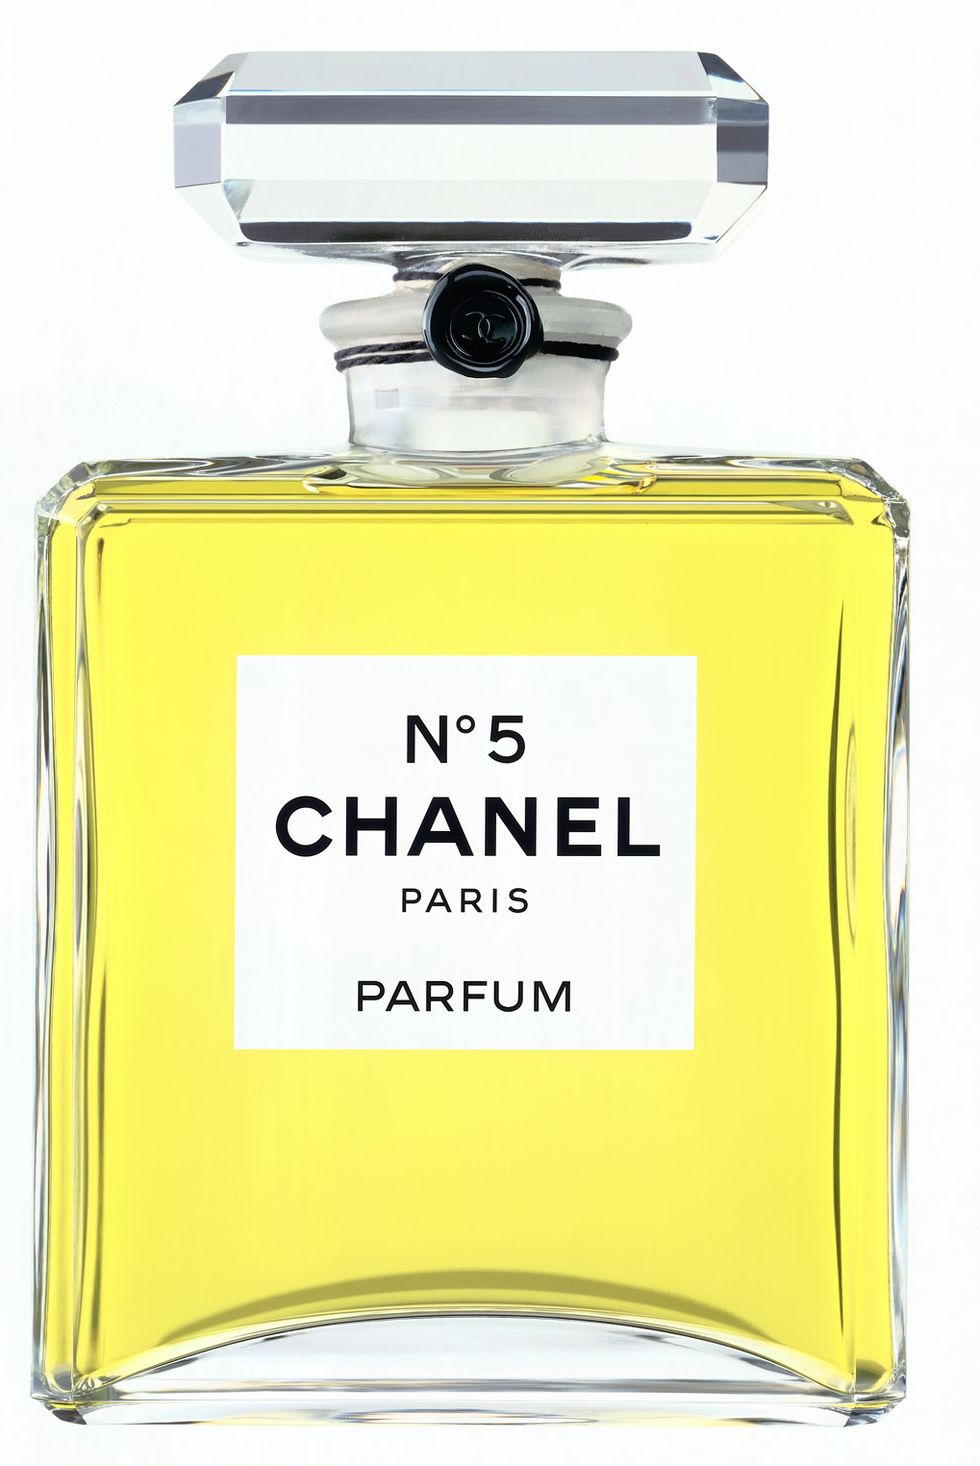 History of Famous Perfumes - The Stories Behind Chanel No 5, White